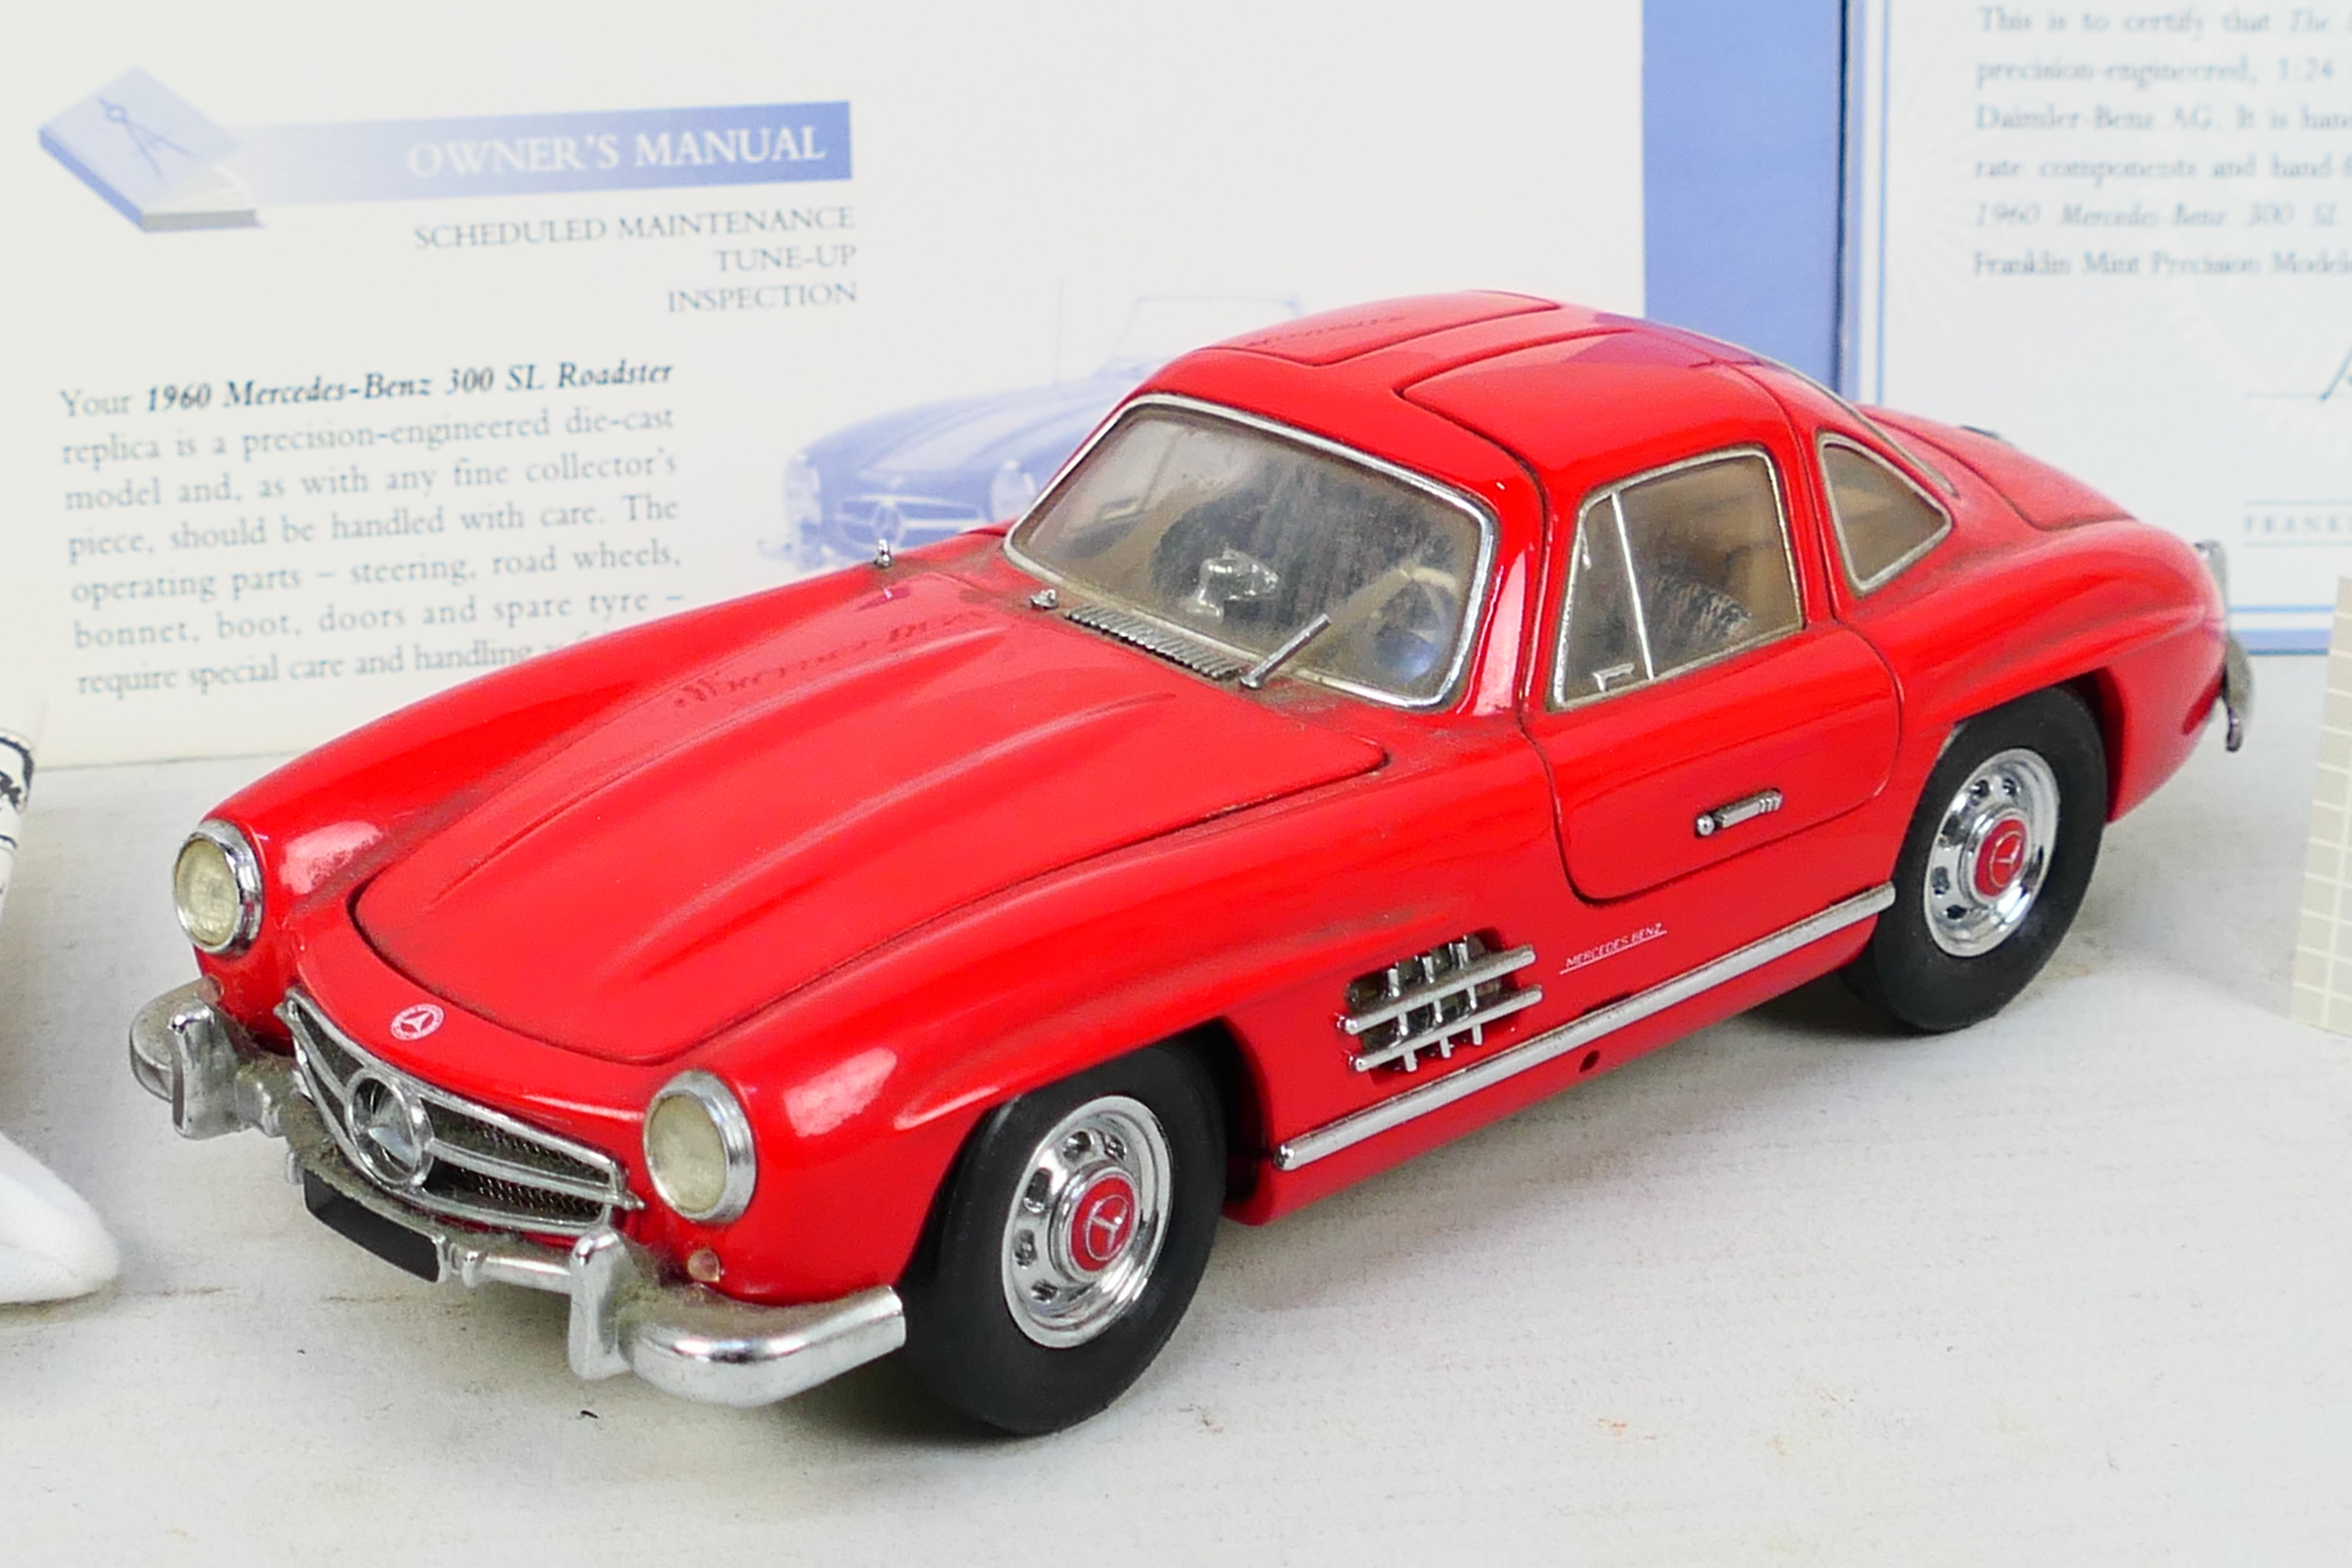 Franklin Mint - A boxed 1:24 scale Franklin Mint 1960 Mercedes Benz Gullwing diecast model car. - Image 2 of 3